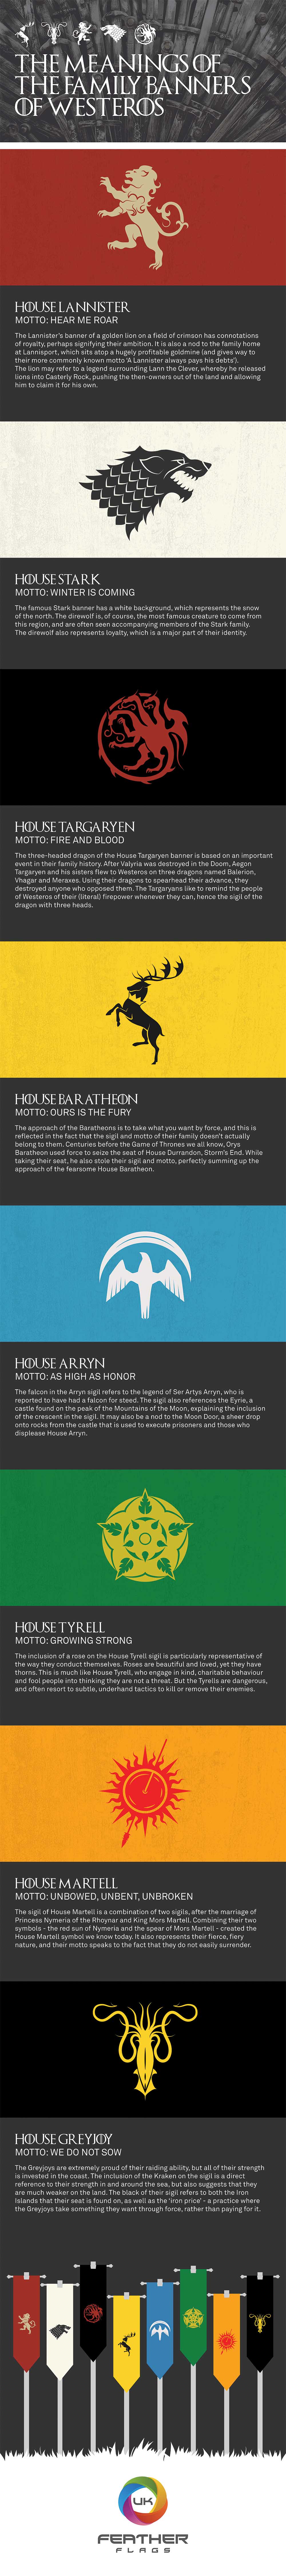 The Meanings of the Family Banners of Westeros